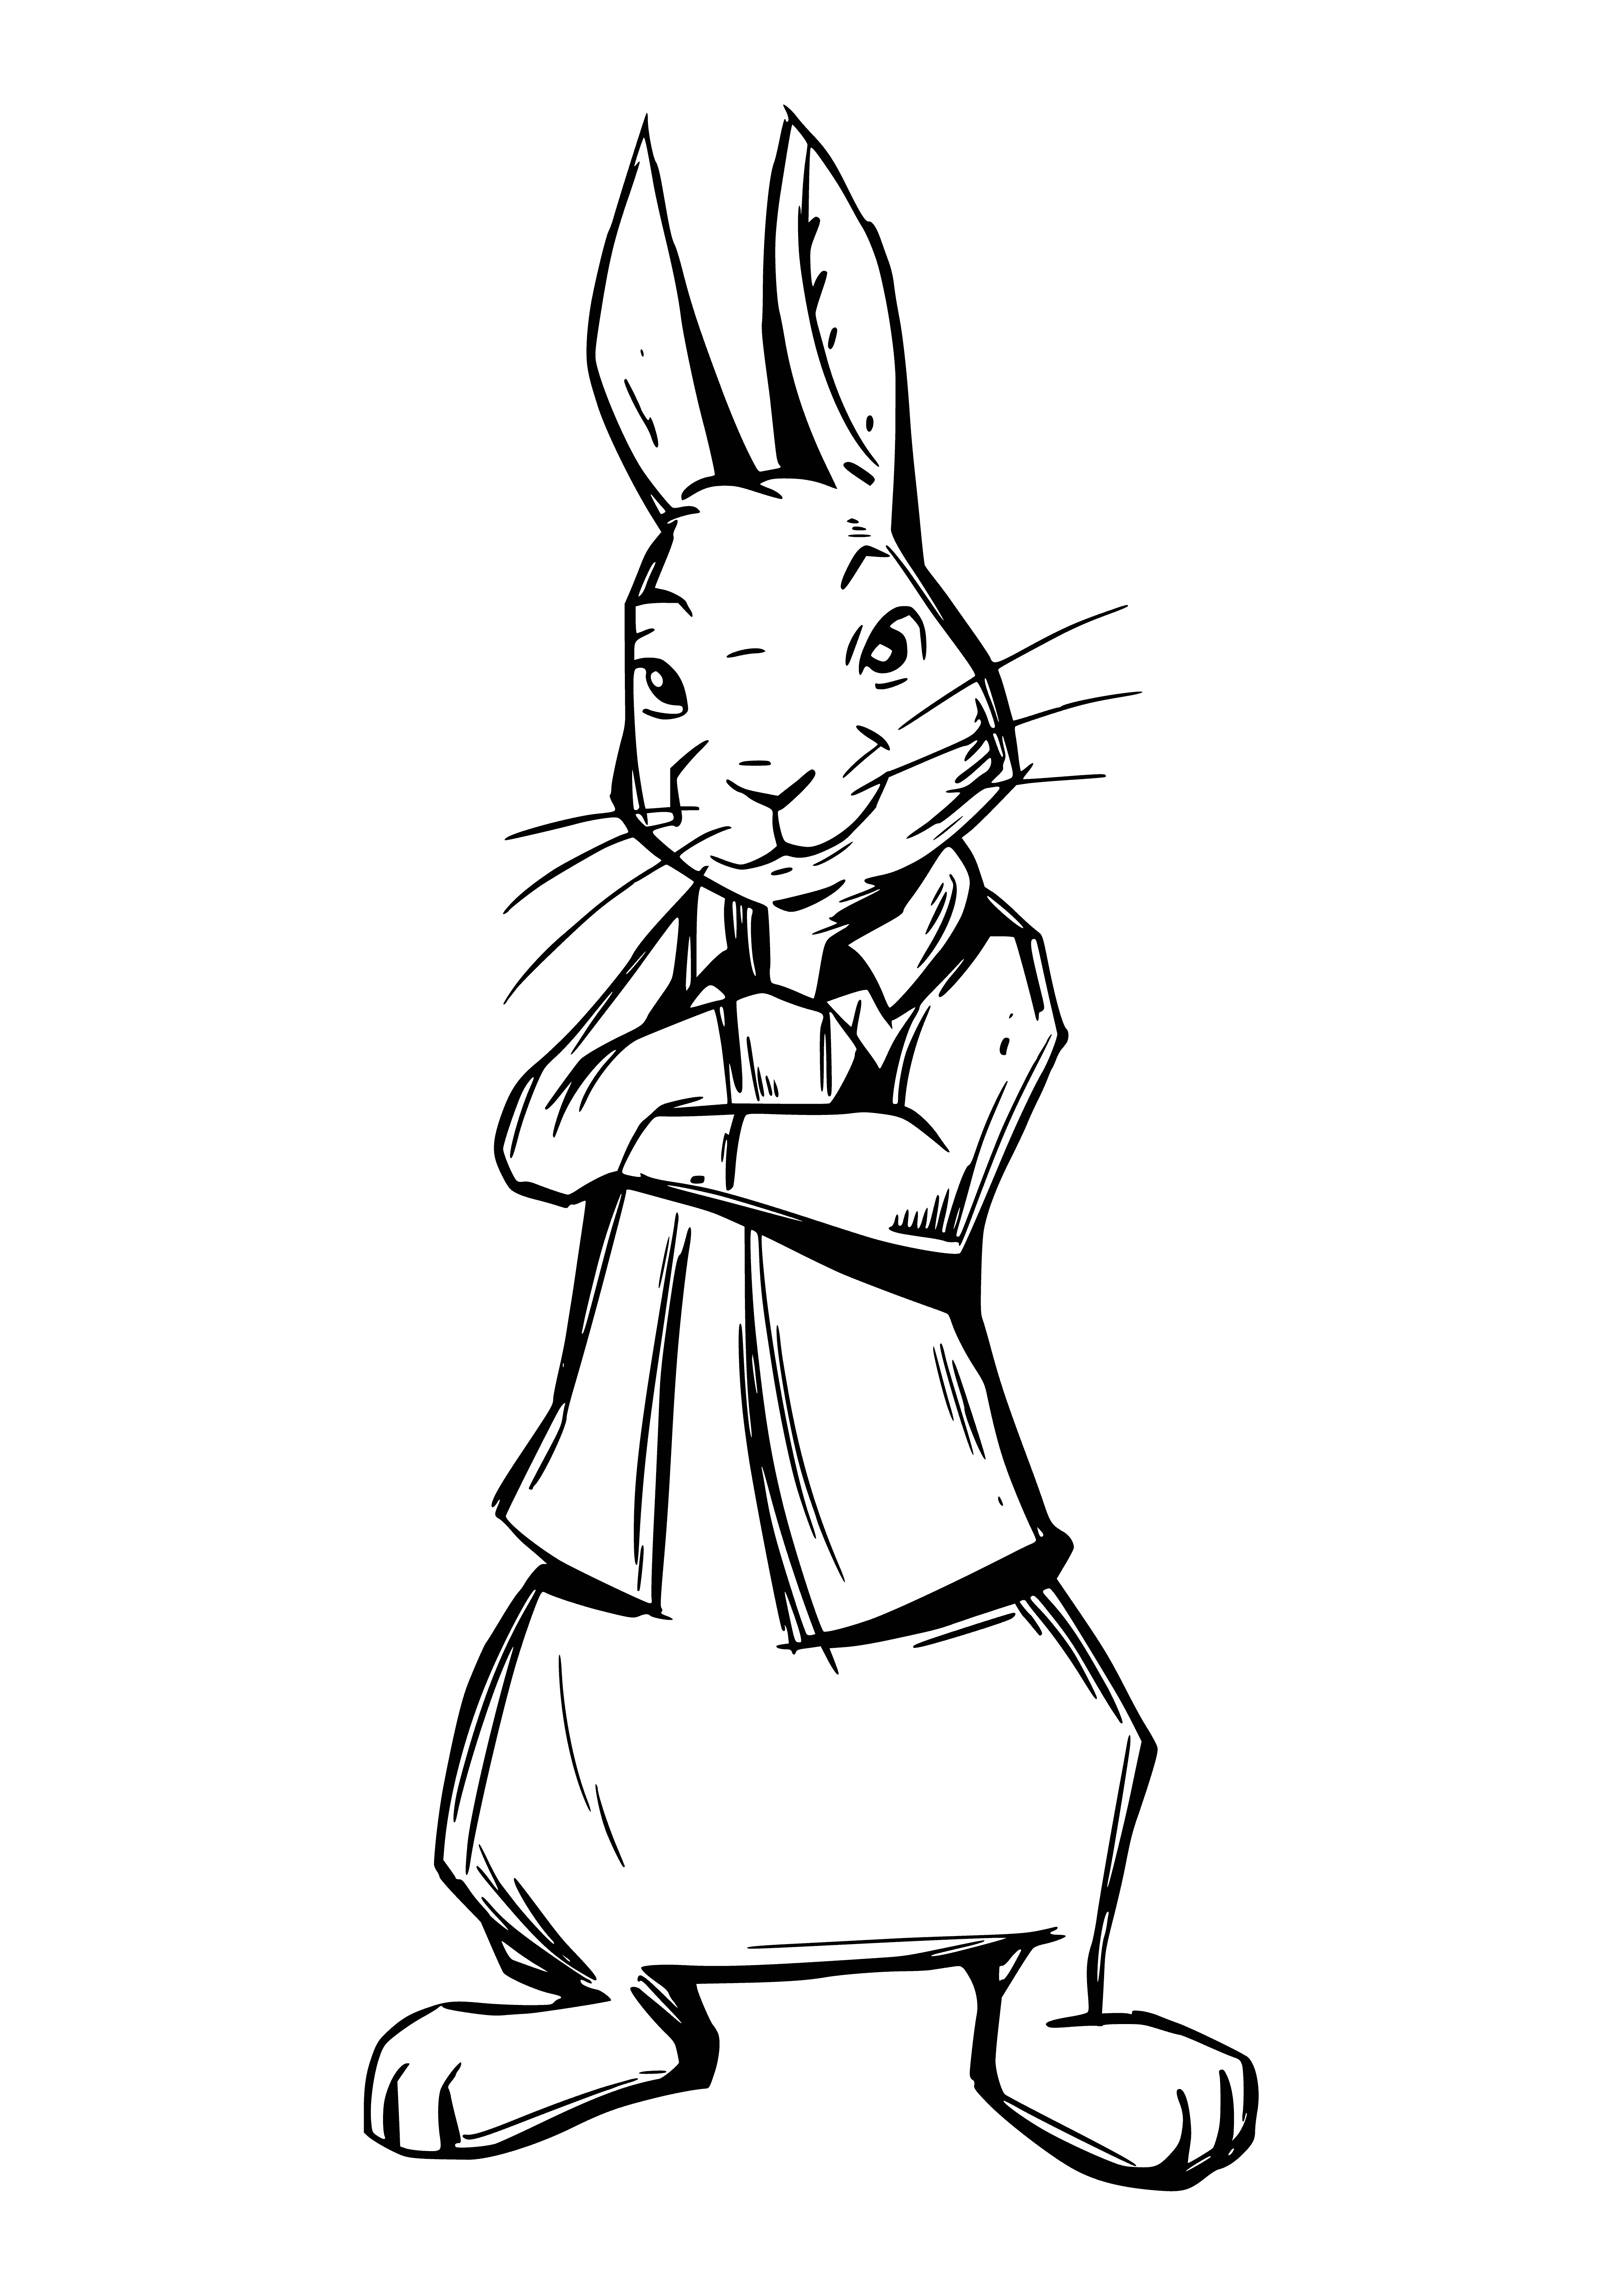 Rabbit Peter coloring page